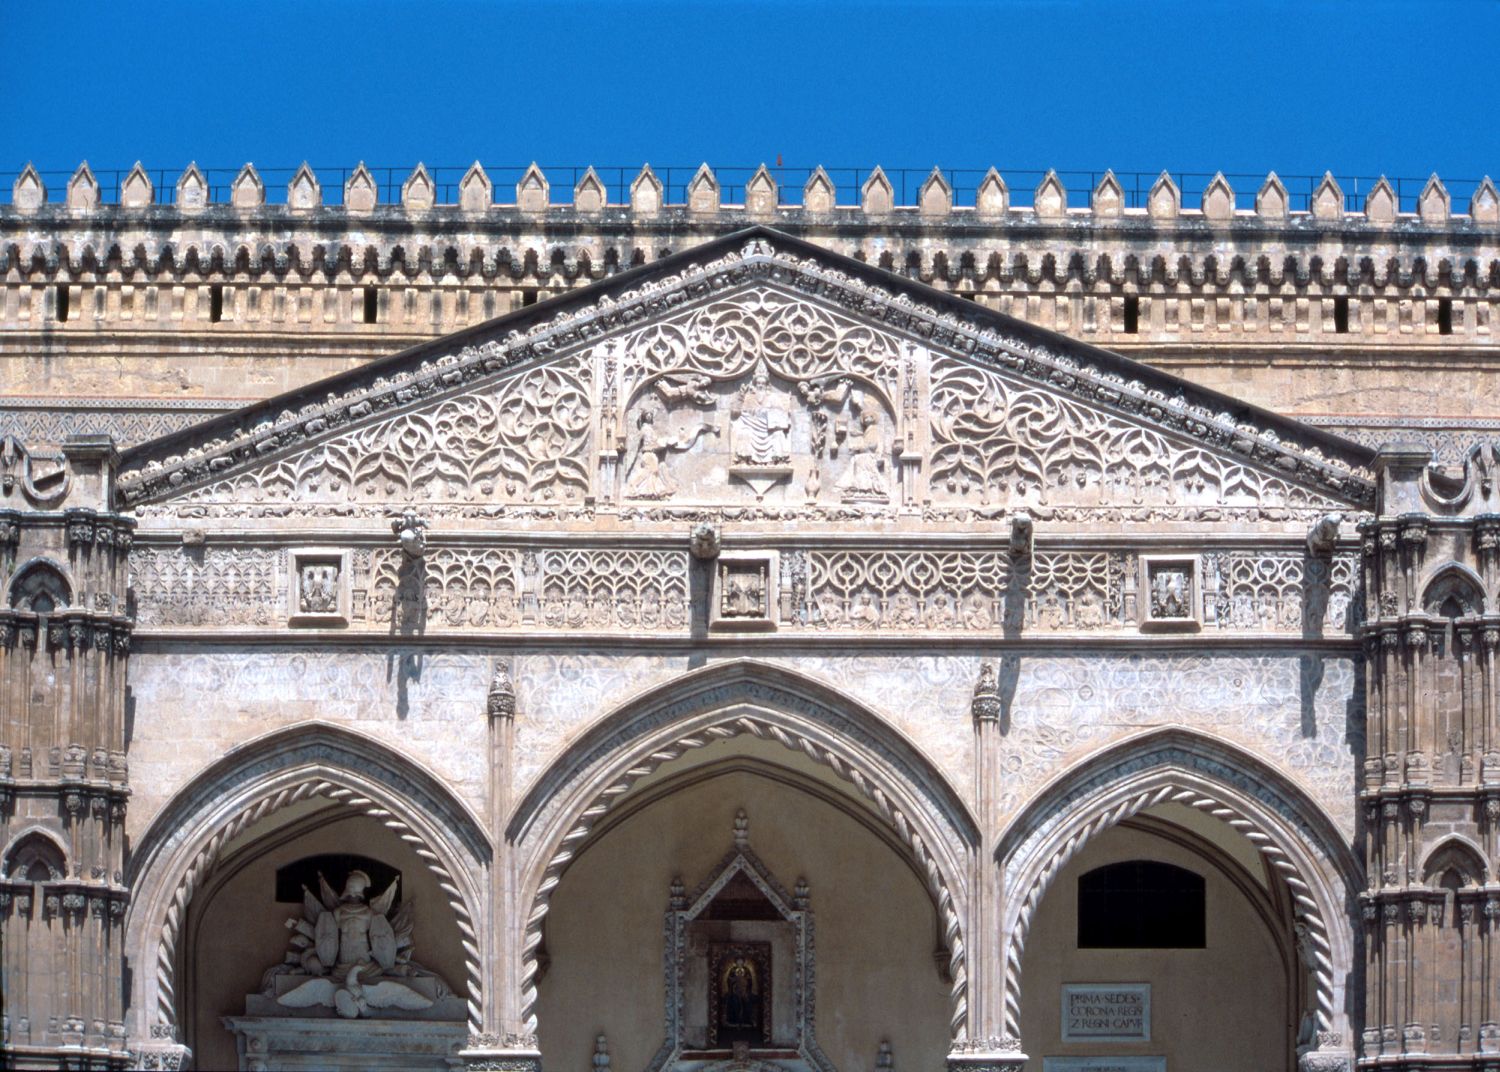 View of top of main portal, showing decorated pediment.